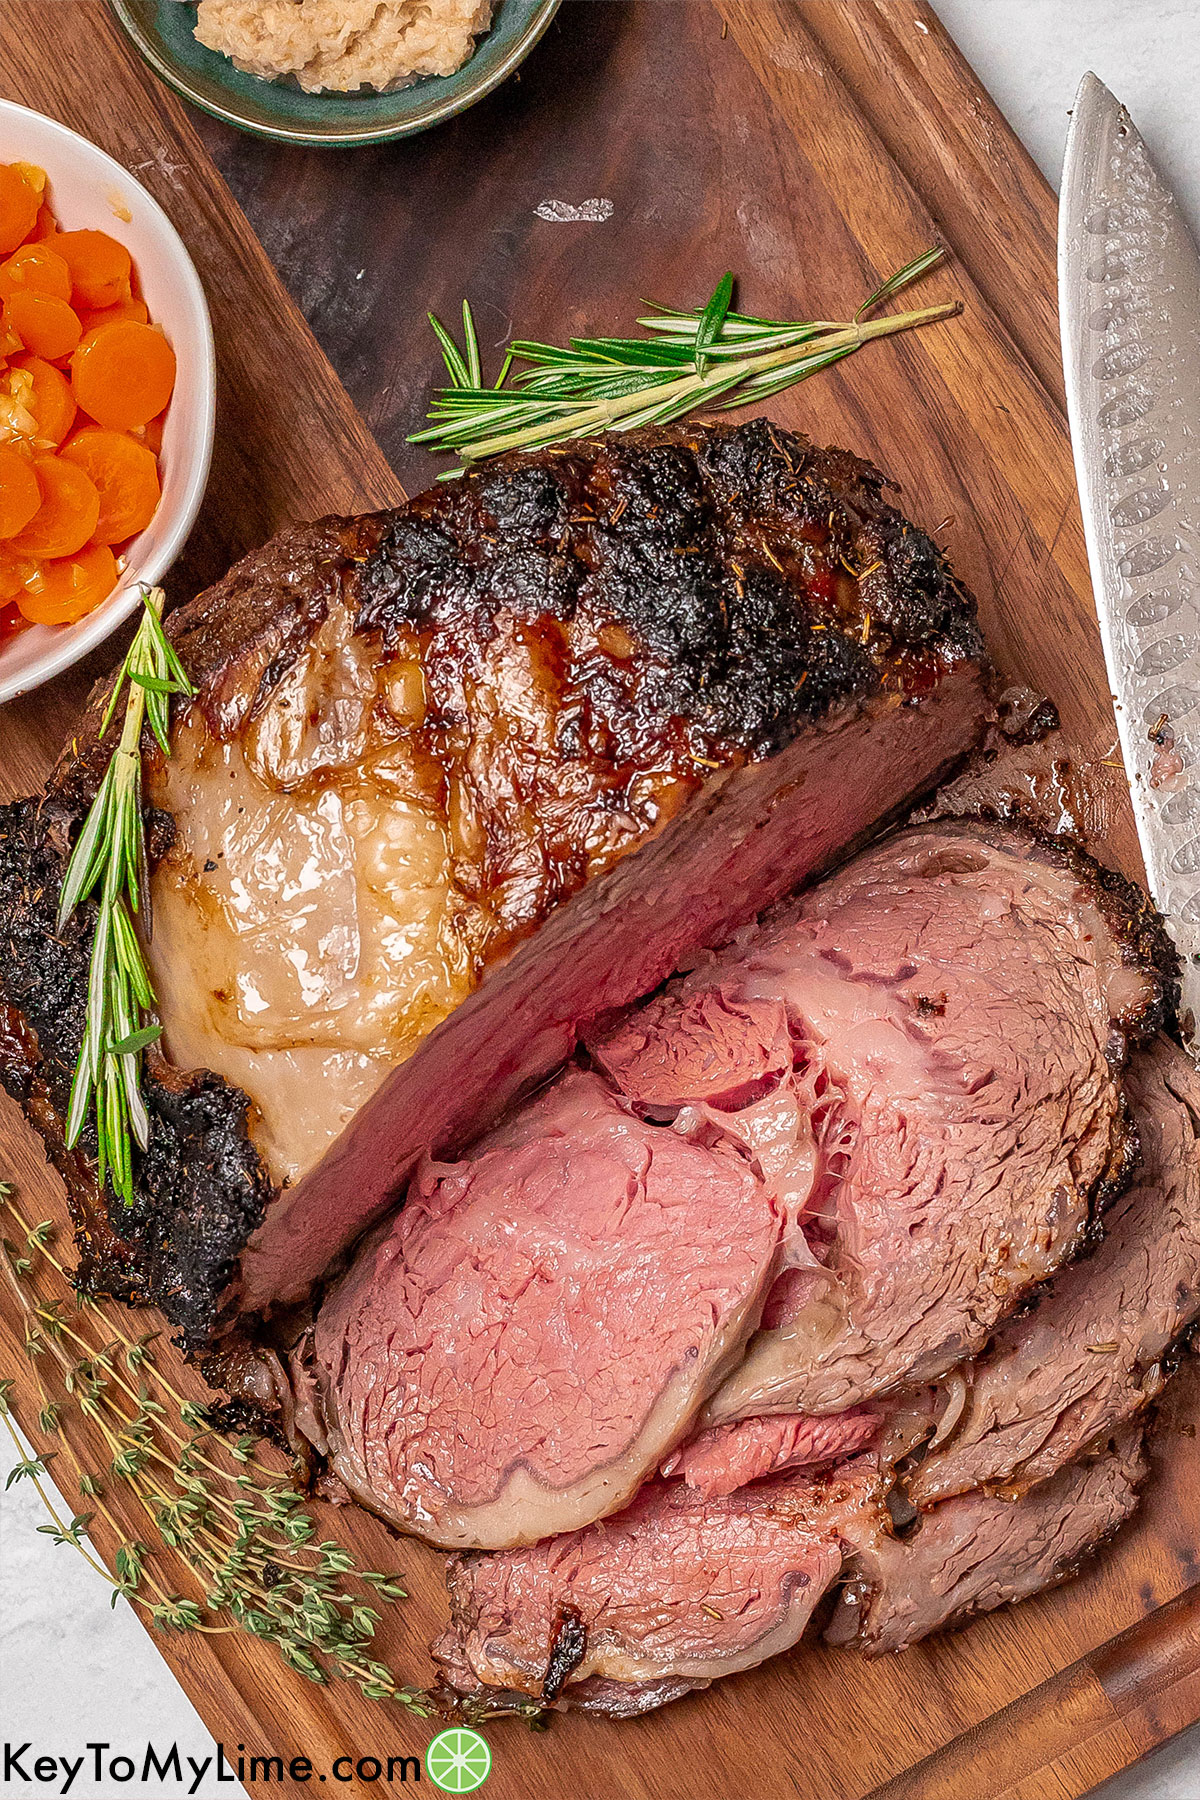 An overhead image of a sliced beef roast with horseradish and carrots to the side.